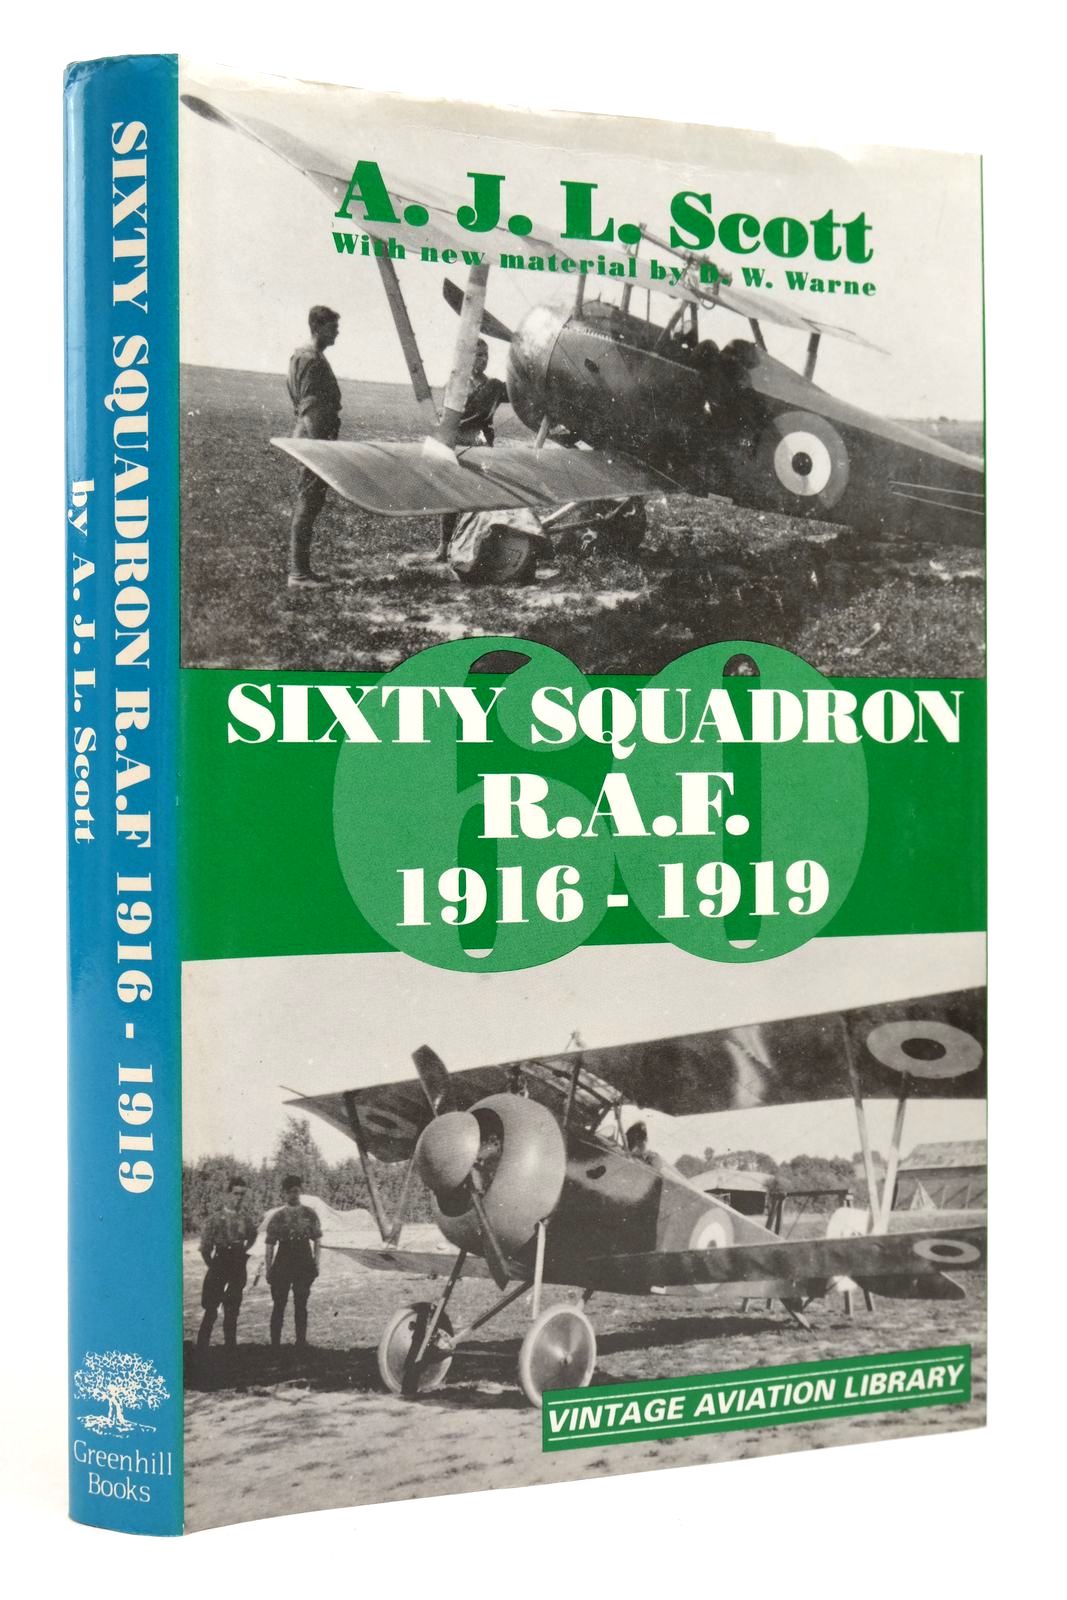 Photo of SIXTY SQUADRON R.A.F.: A HISTORY OF THE SQUADRON 1916 - 1919 written by Scott, A.J.L. Cecil, Hugh published by Greenhill Books (STOCK CODE: 2139817)  for sale by Stella & Rose's Books